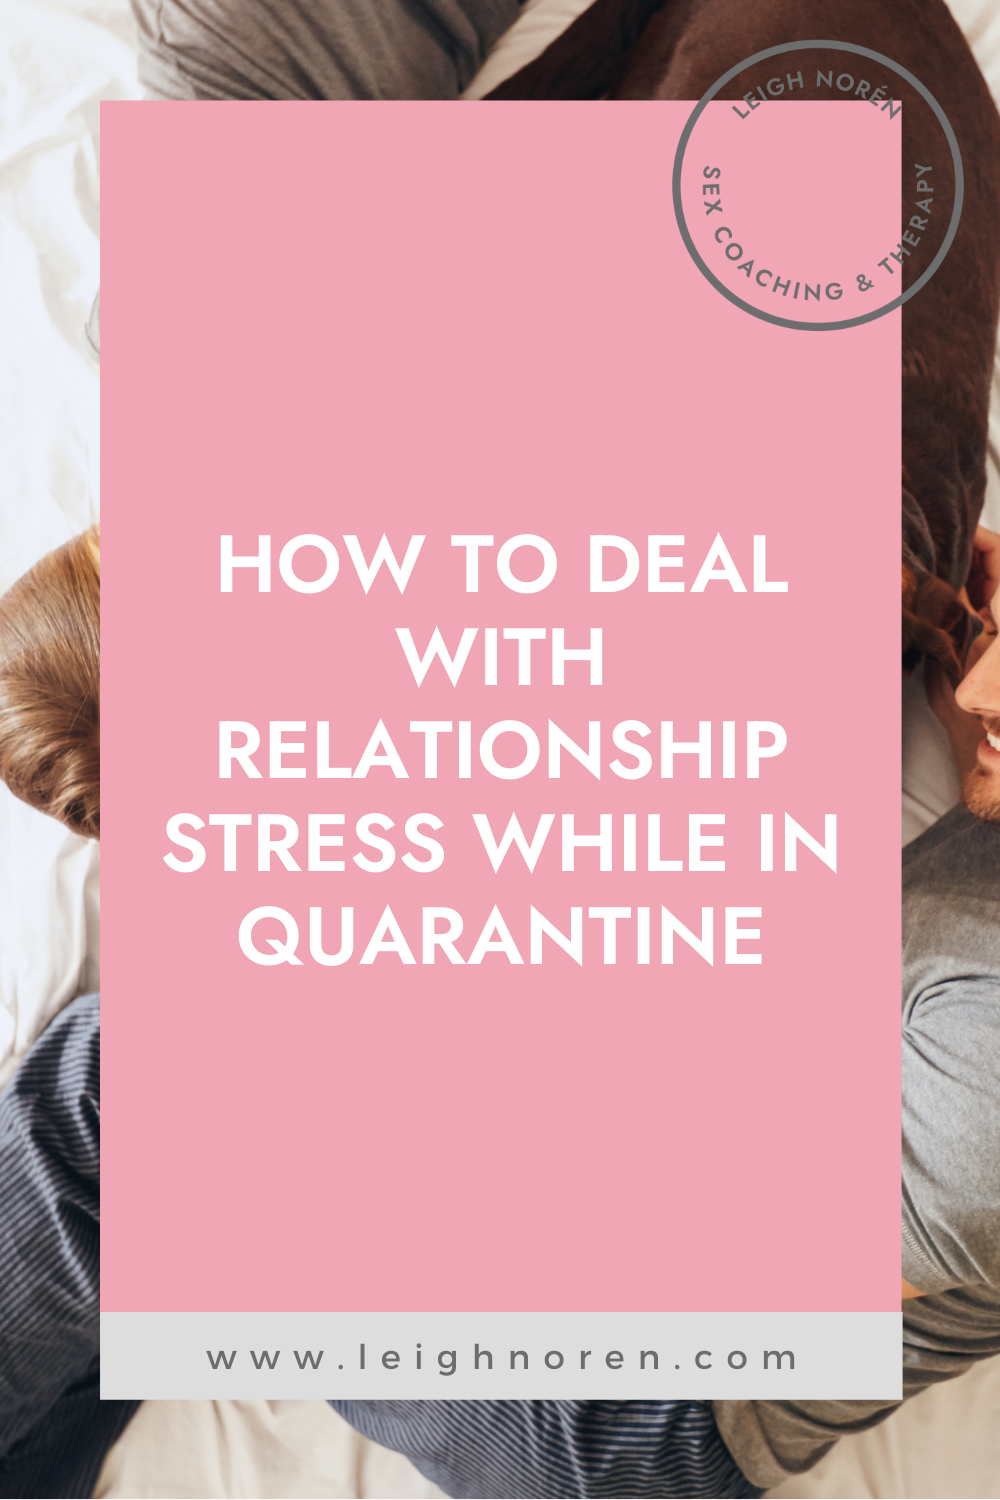 How To Deal With Relationship Stress While In Quarantine